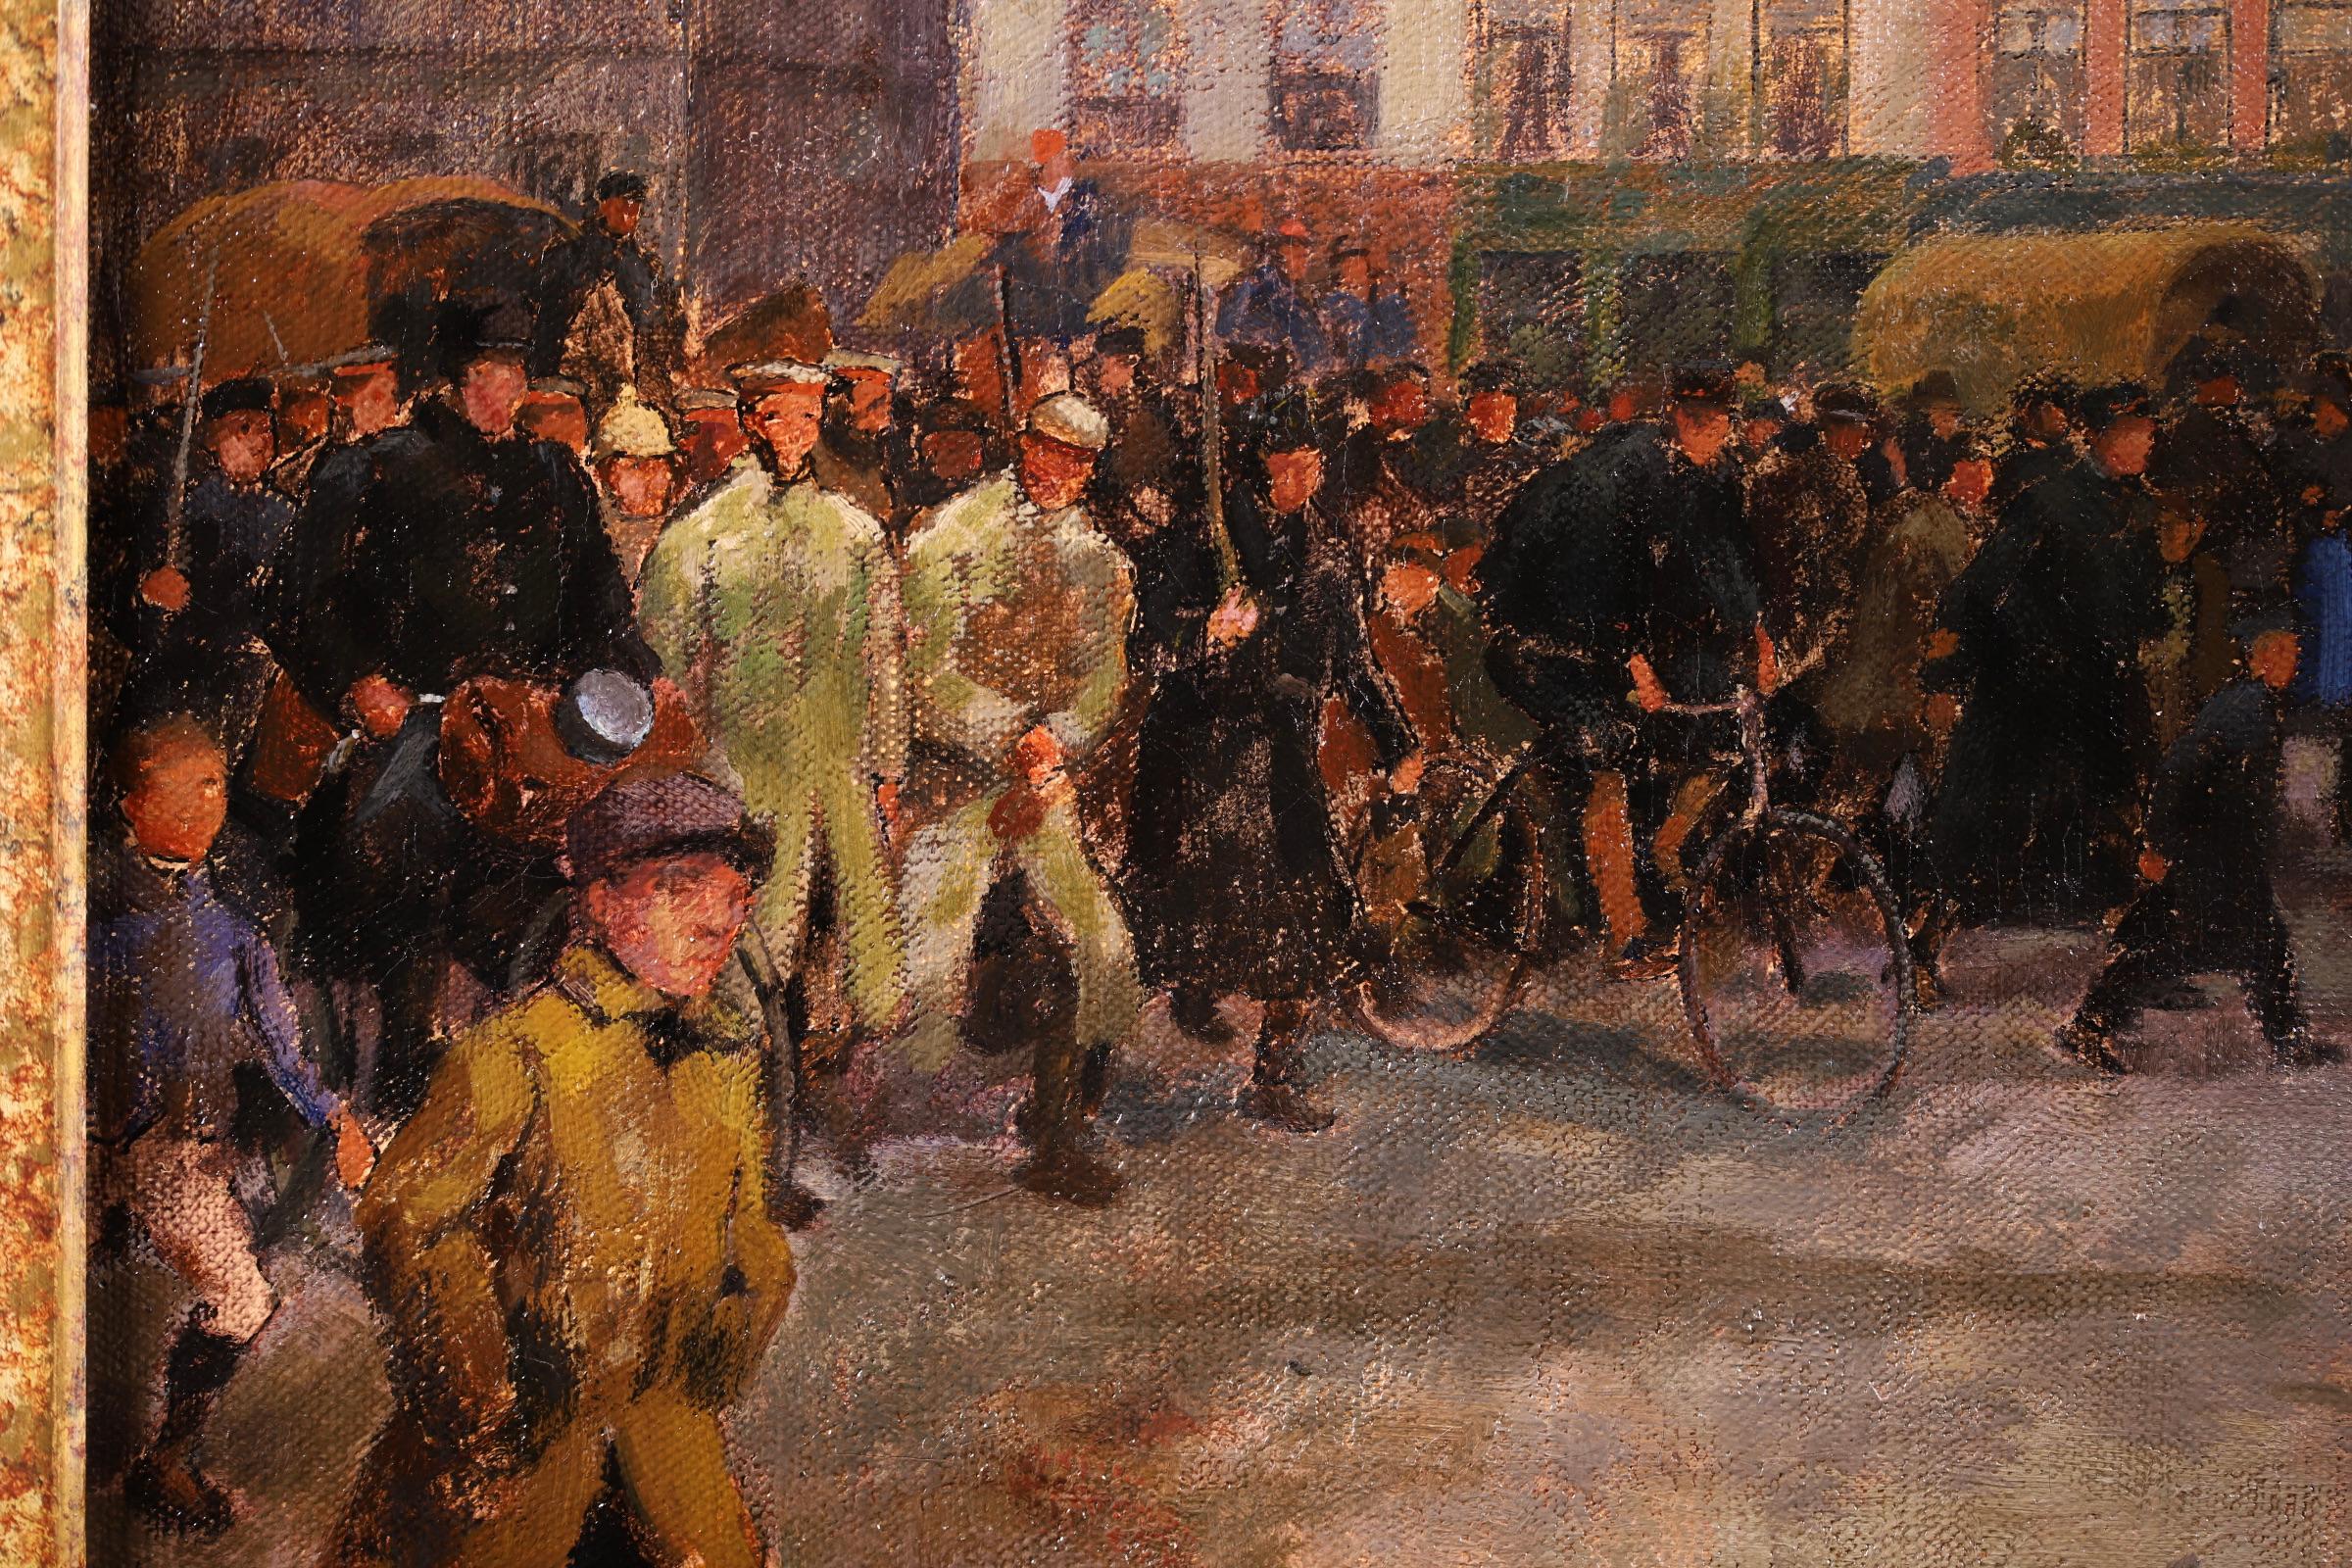 An historical and wonderfully painted oil on canvas by French impressionist painter and illustrator Andre Devambez. This work depicts the subject of soldiers rallying in Ypres and heading off to the front line. Devambez volunteered for combat in